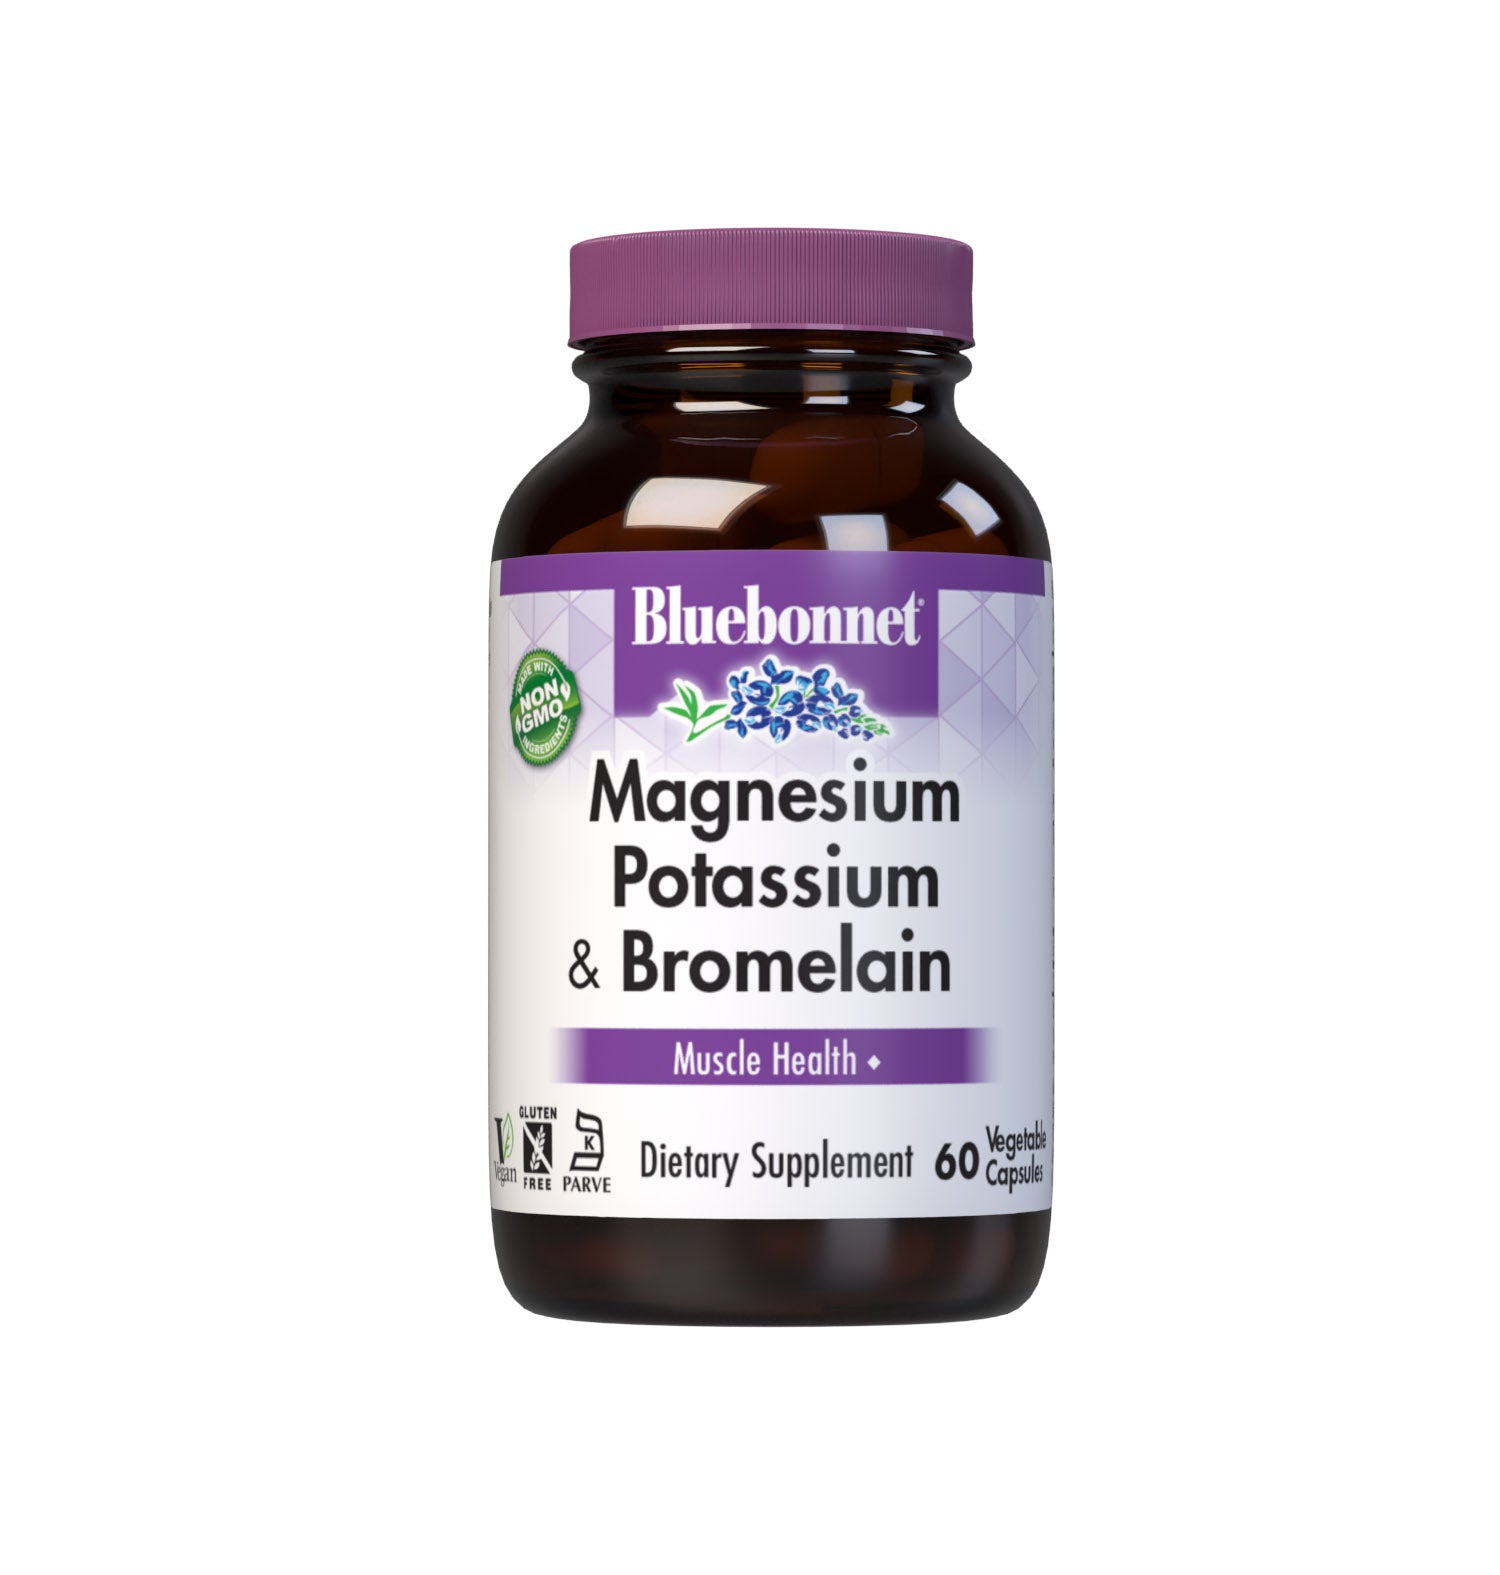 Bluebonnet's Magnesium Potassium & Bromelain 60 Vegetable Capsules are formulated with fully reacted magnesium and potassium aspartate with bromelain (2000 GDU/gram) from fresh pineapples to help support muscle health. #size_60 count